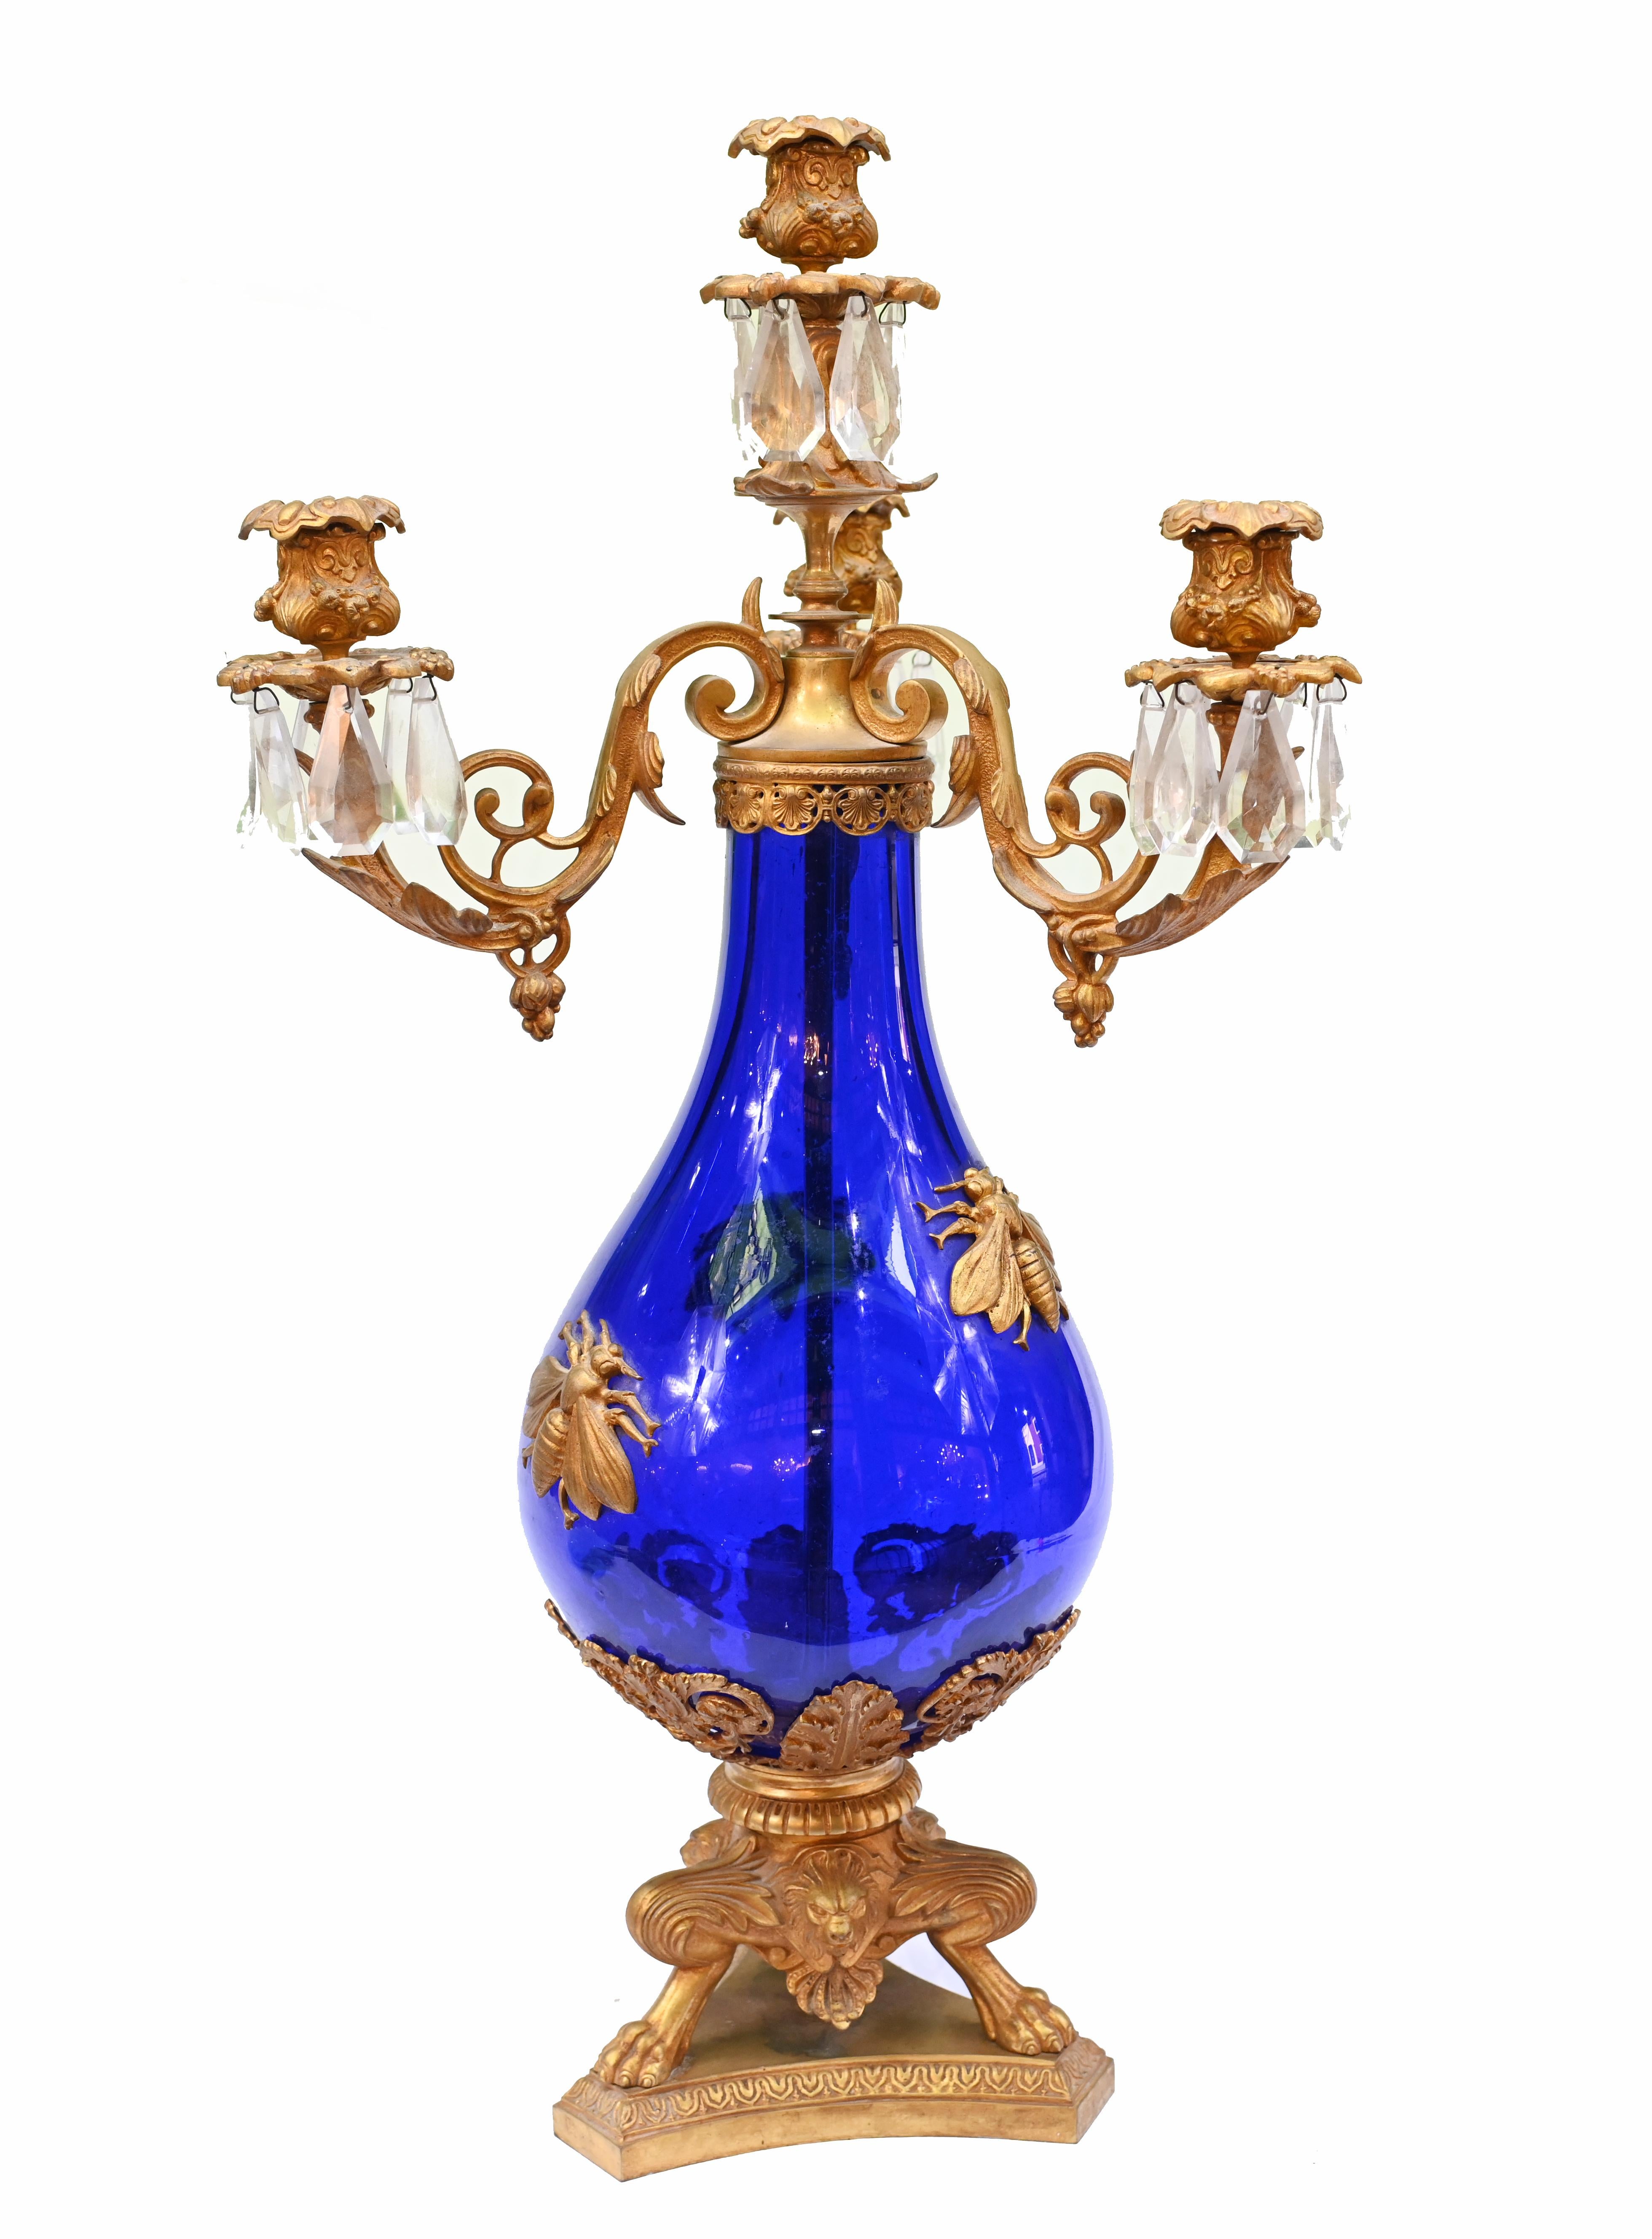 Great pair of antique French candelabras with gilt branches mounted on blue glass vases
Four branches to each urn
Love the quirky winged insect - hornet? - mounts on the glass
Base also distinctive with acanthus motifs and lions paw feet
Circa